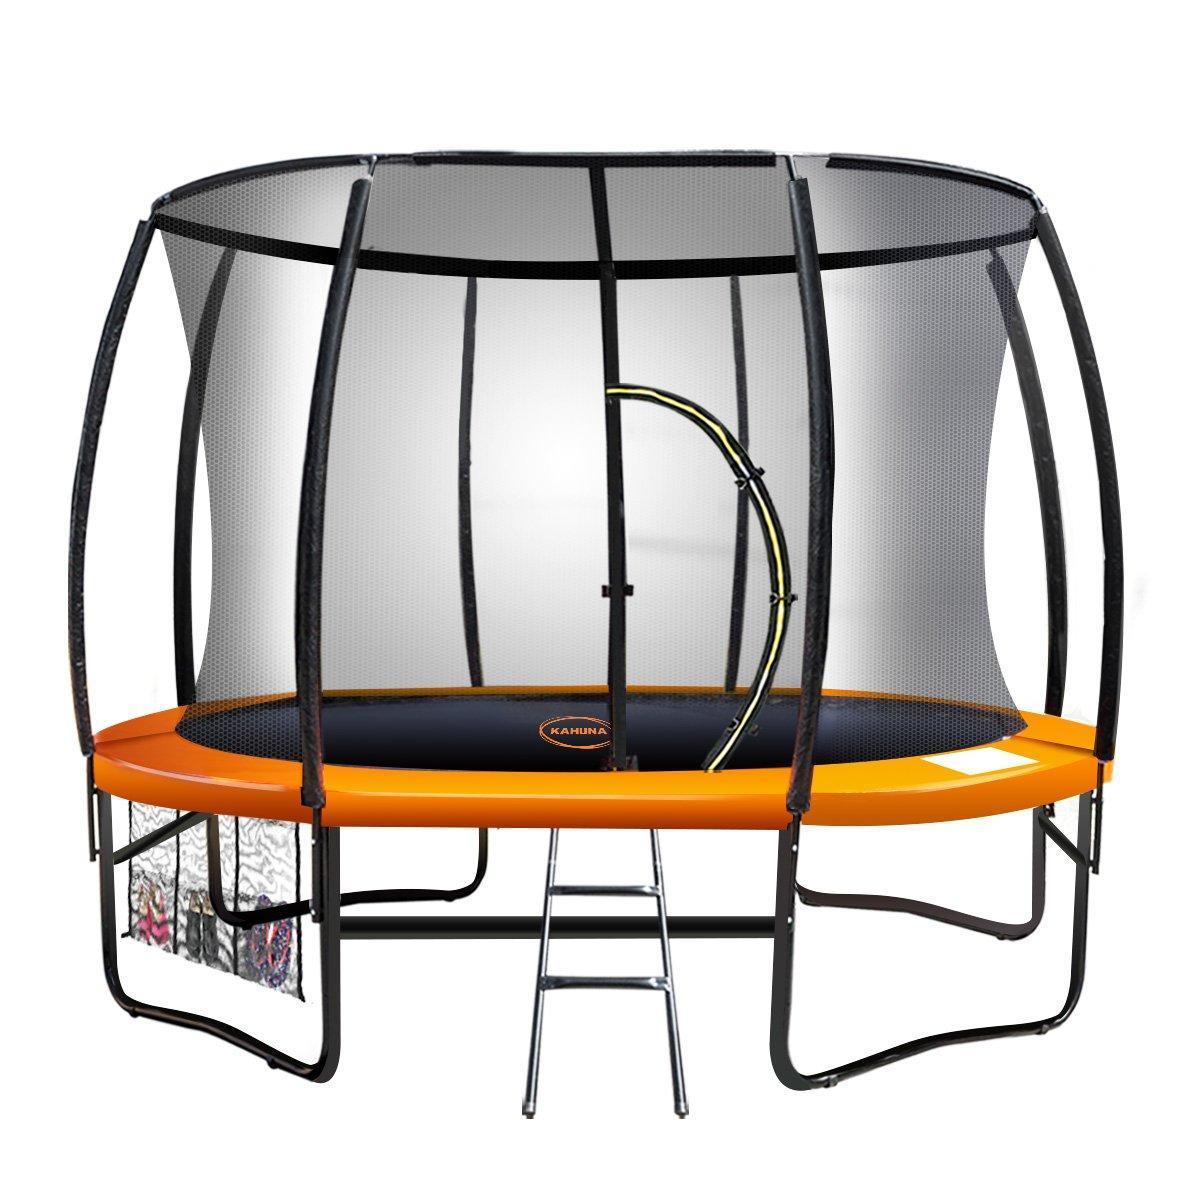 Trampoline - 10ft | Free Ladder, Spring Mat, Net, Safety Pad Cover, Round Enclosure - Orange by Kahuna